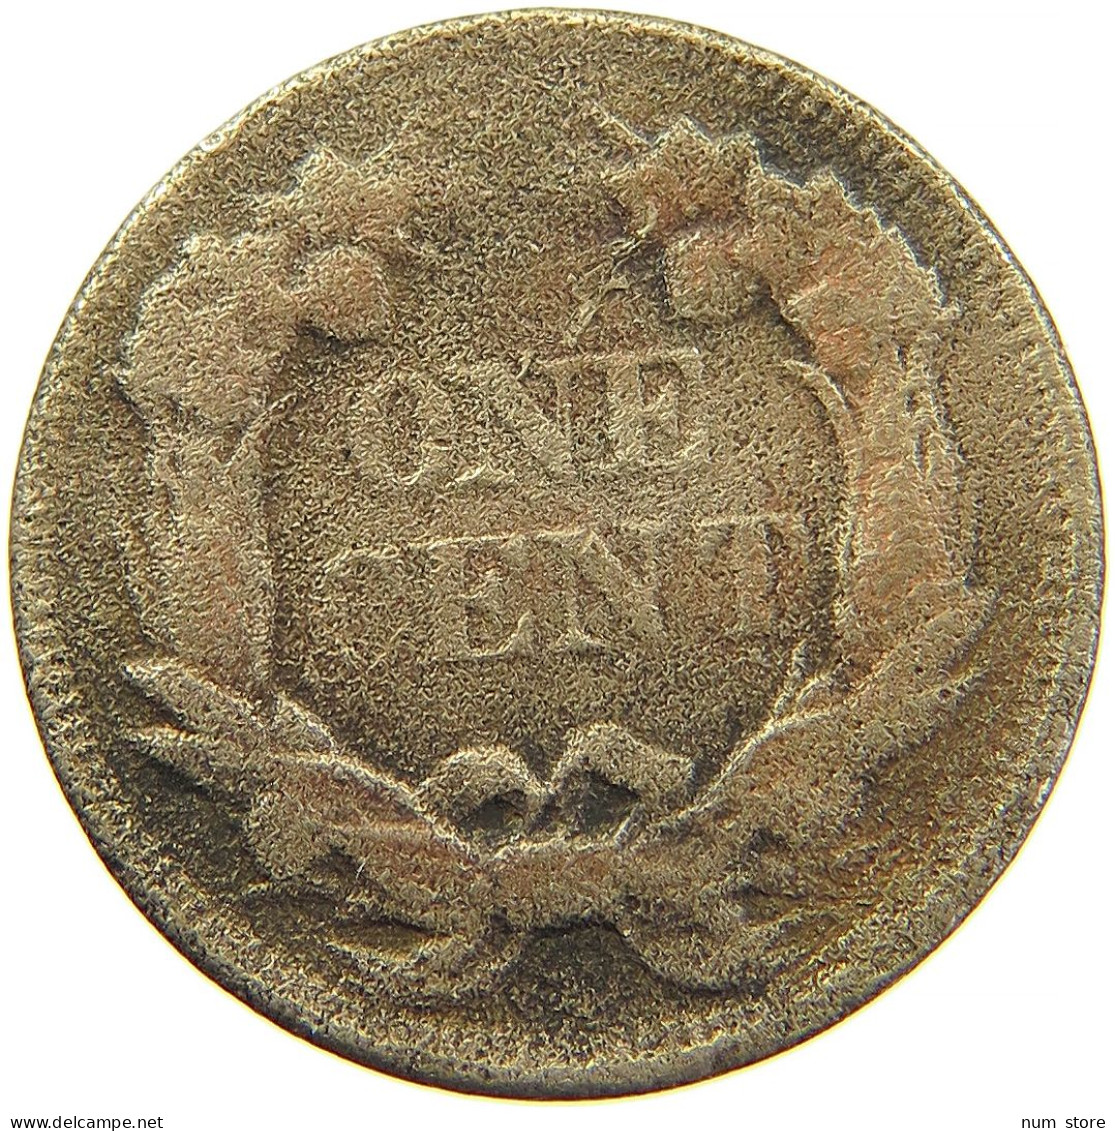 UNITED STATES OF AMERICA CENT 1858 FLYING EAGLE #s091 0401 - 1856-1858: Flying Eagle (Aquila Volante)